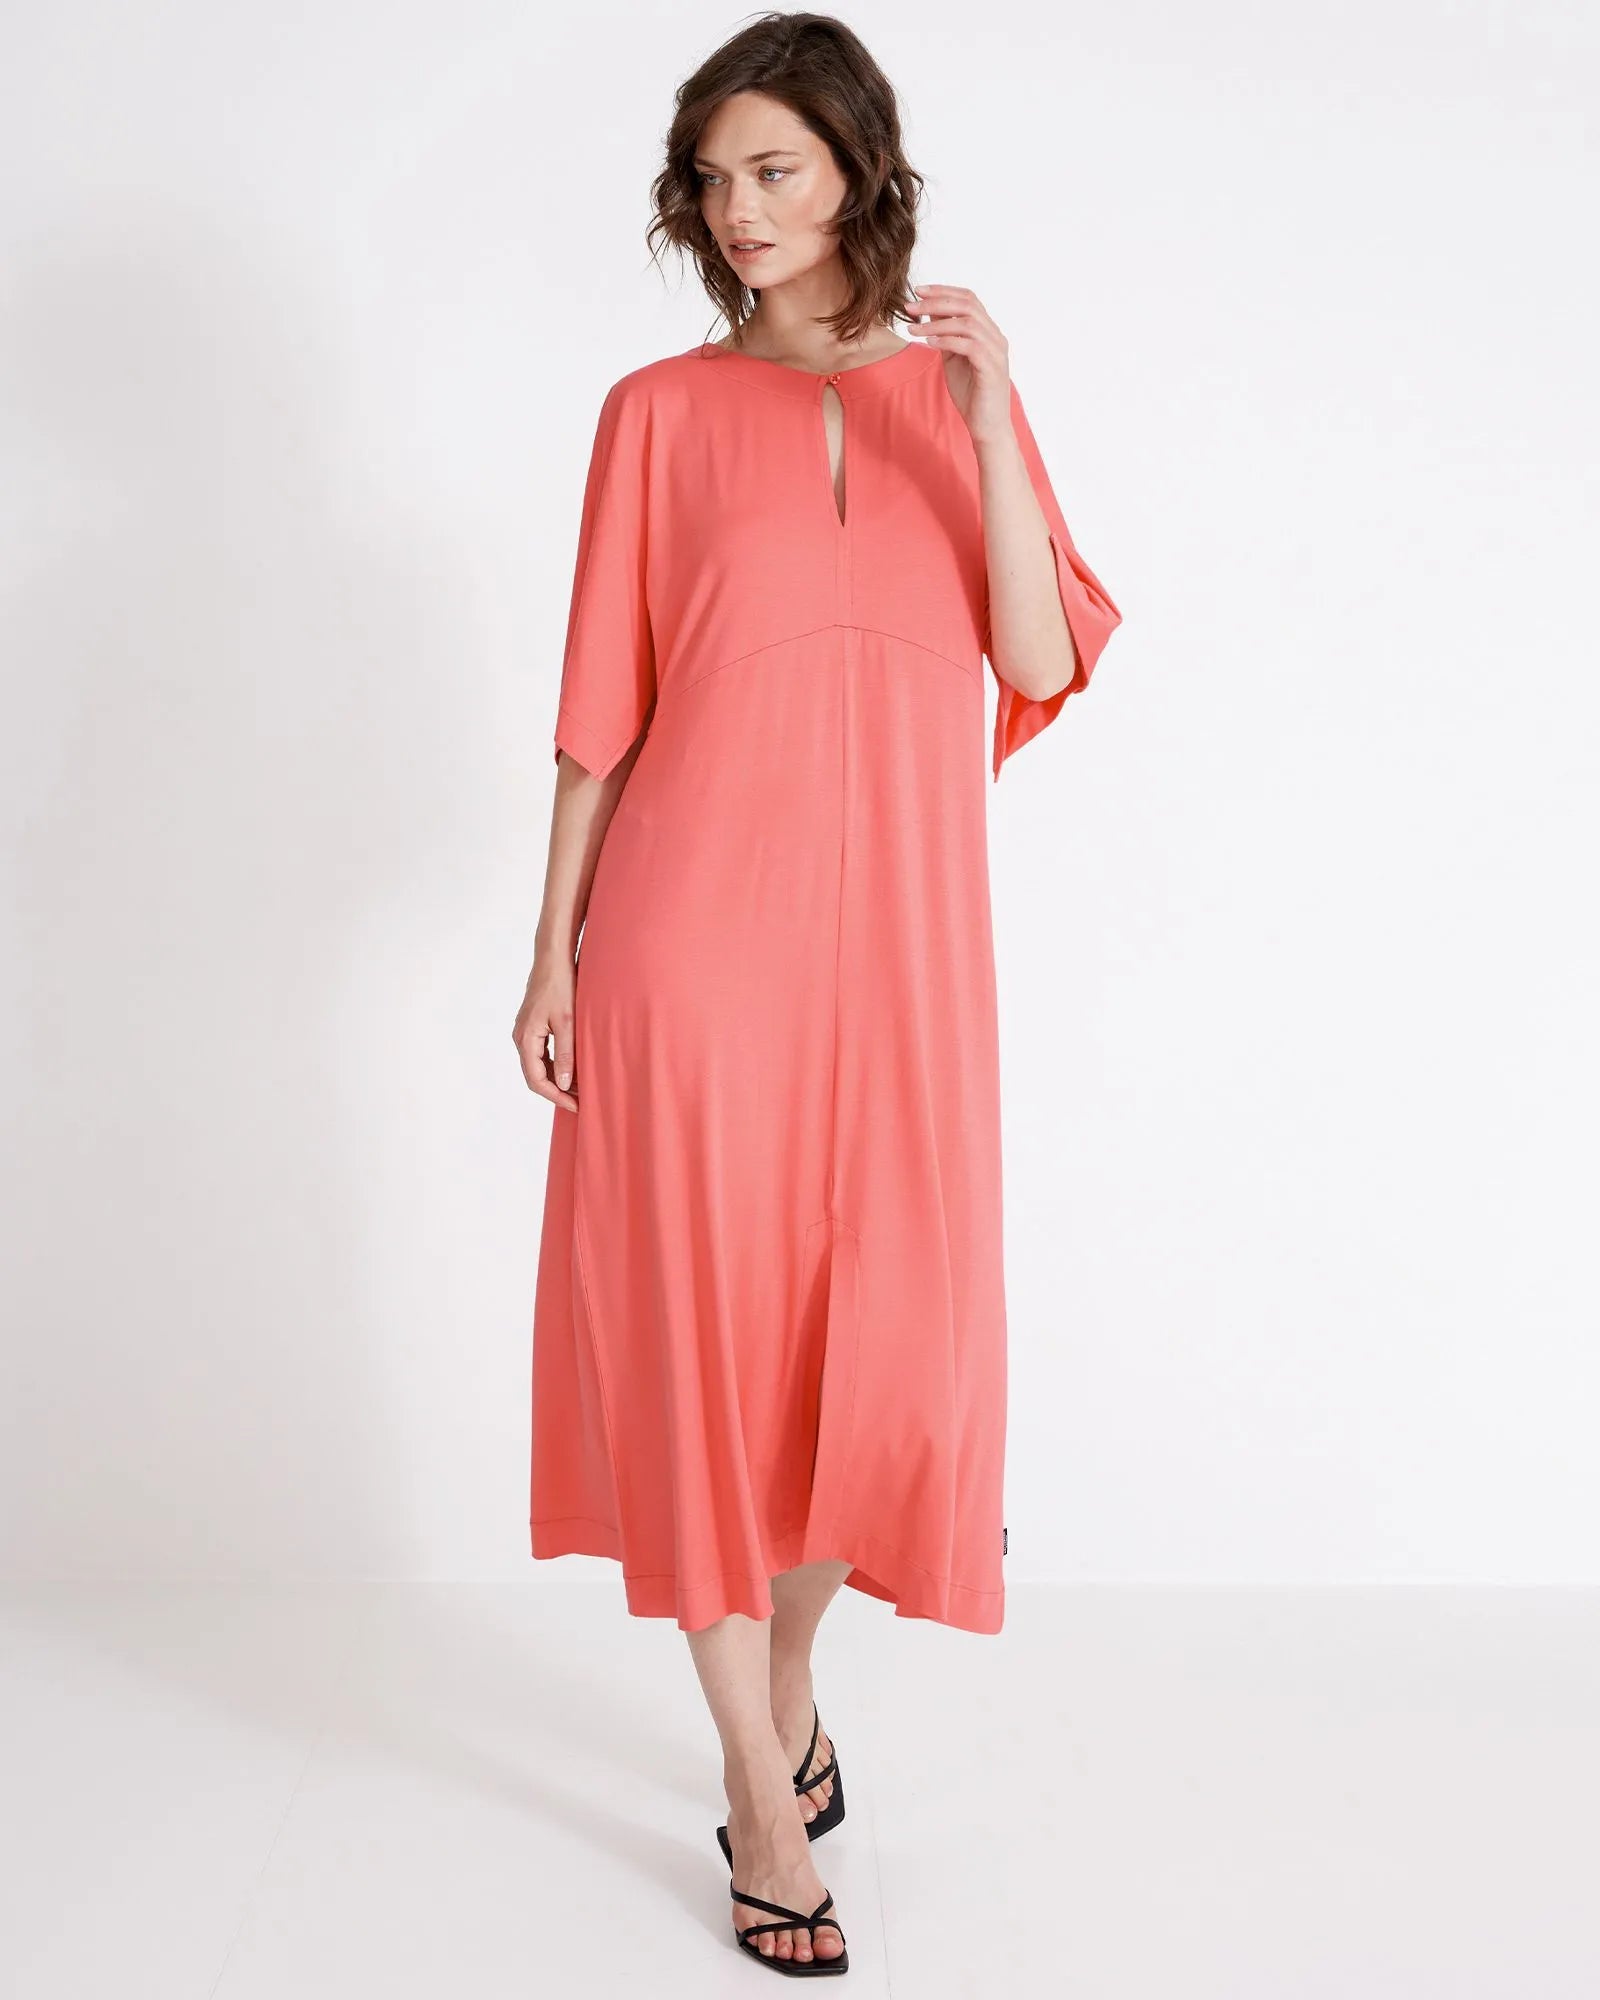 Asta Mid Length Dress - Coral Pink